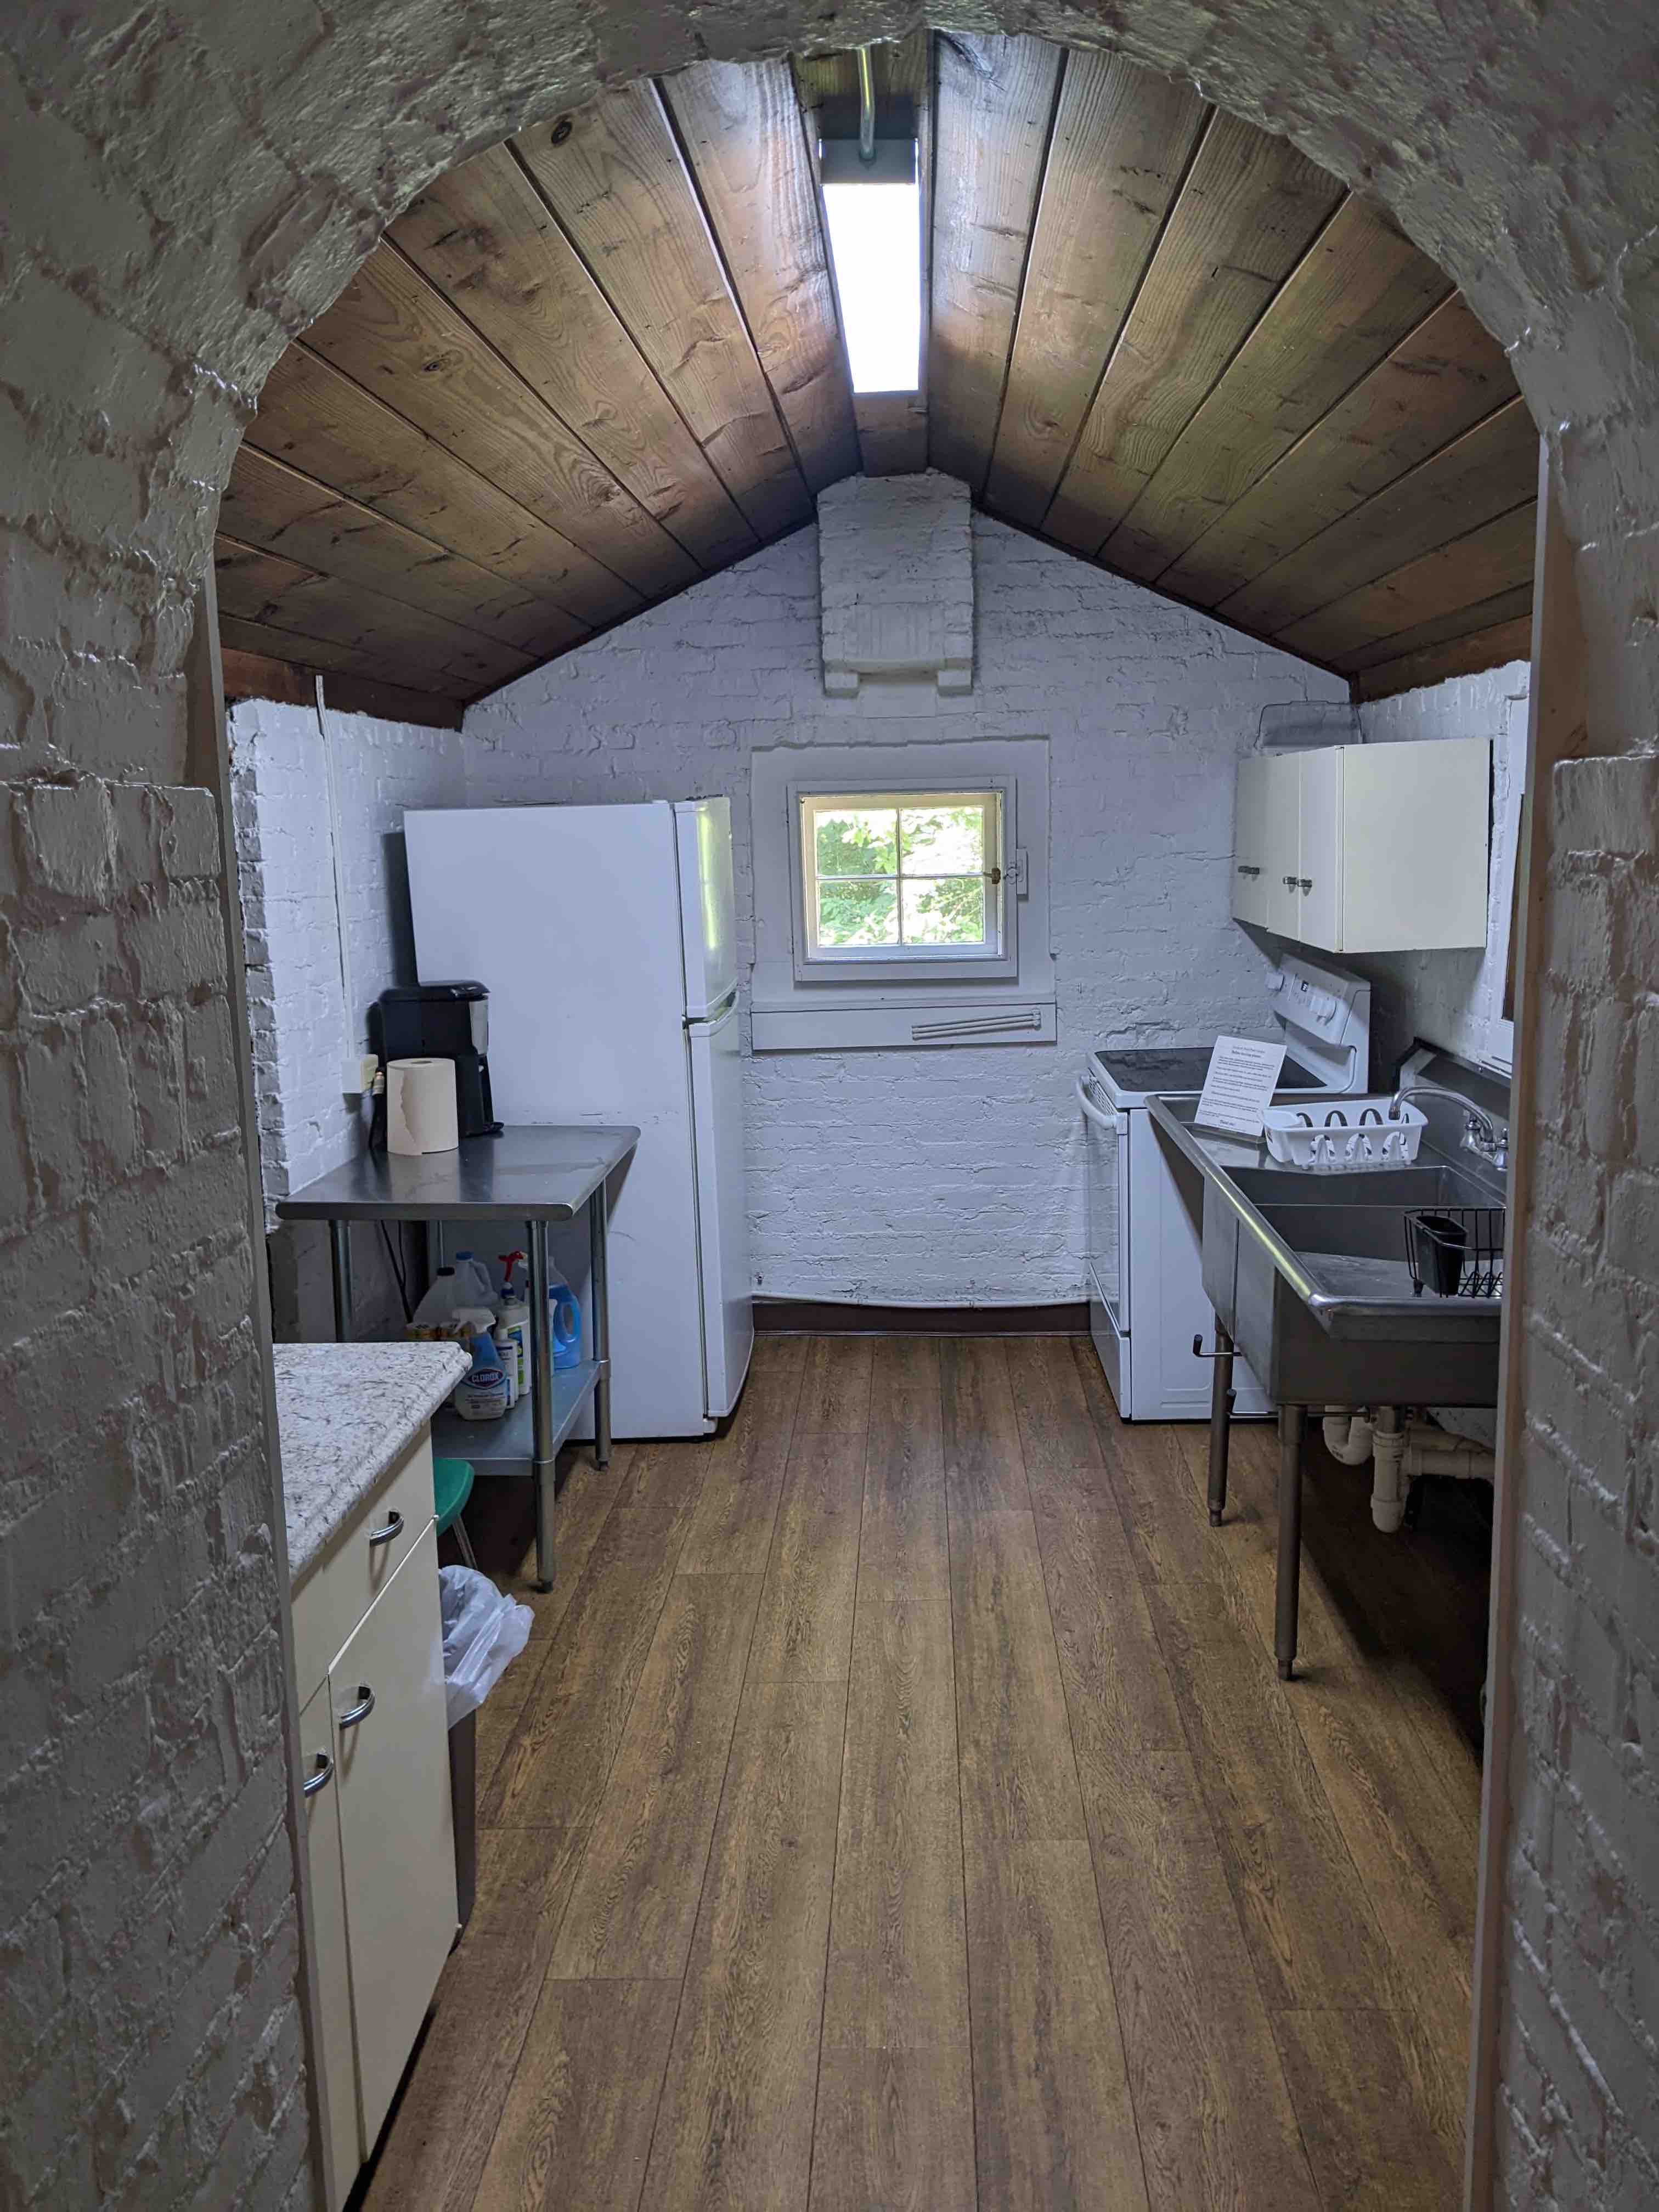 Kitchen facilities in the Lodge